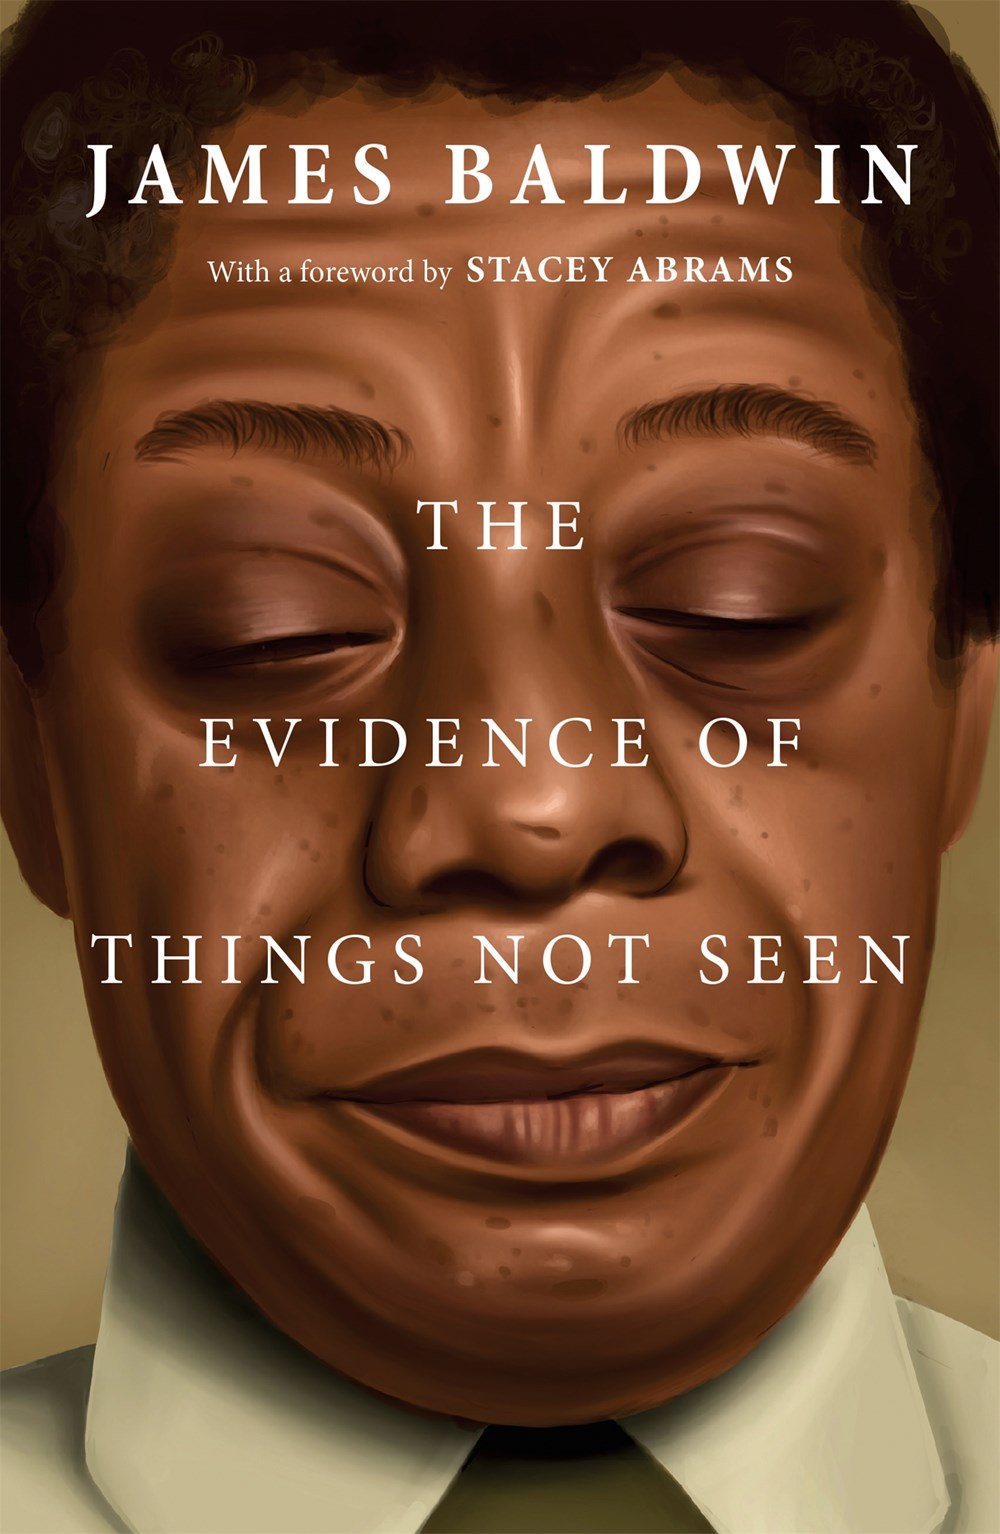 The Evidence of Things Not Seen by James Baldwin